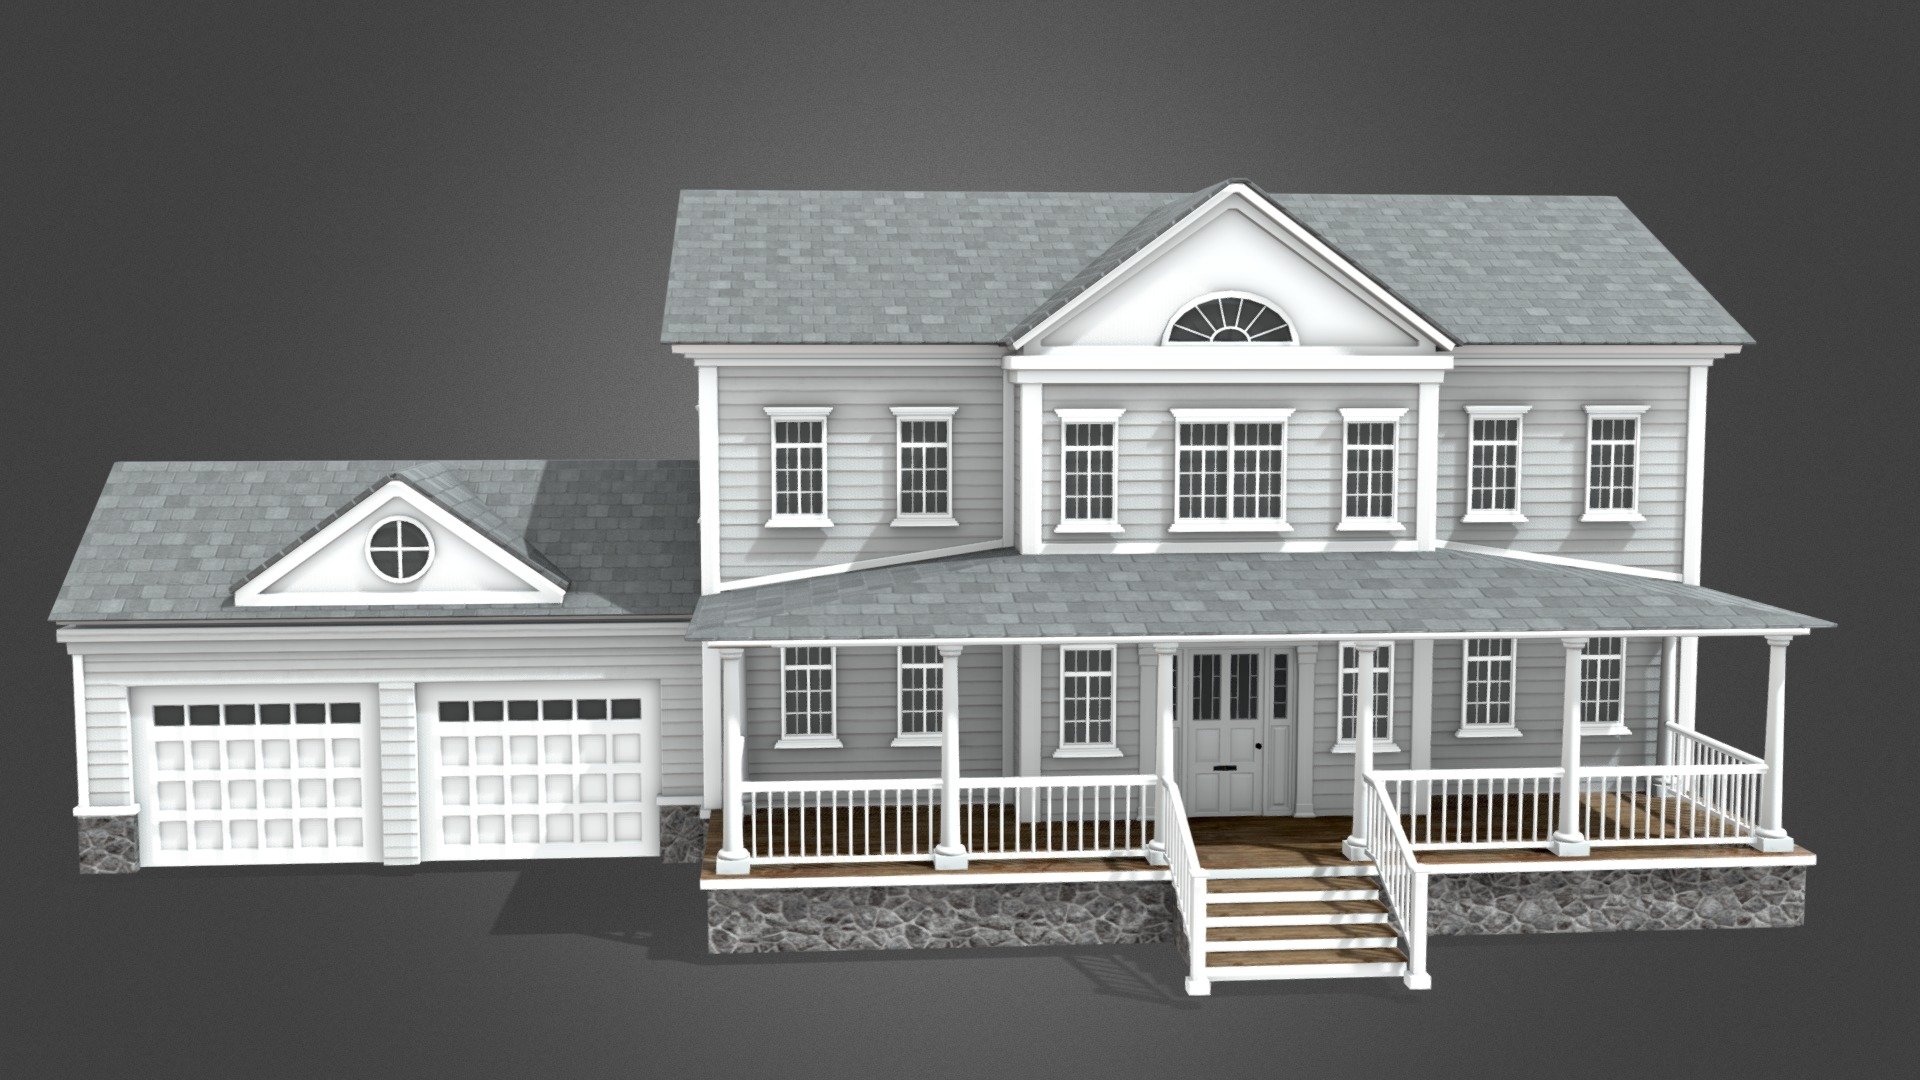 Colonial style home, can be used in games or for architecture visualization.  I tried keeping the poly count low 3d model